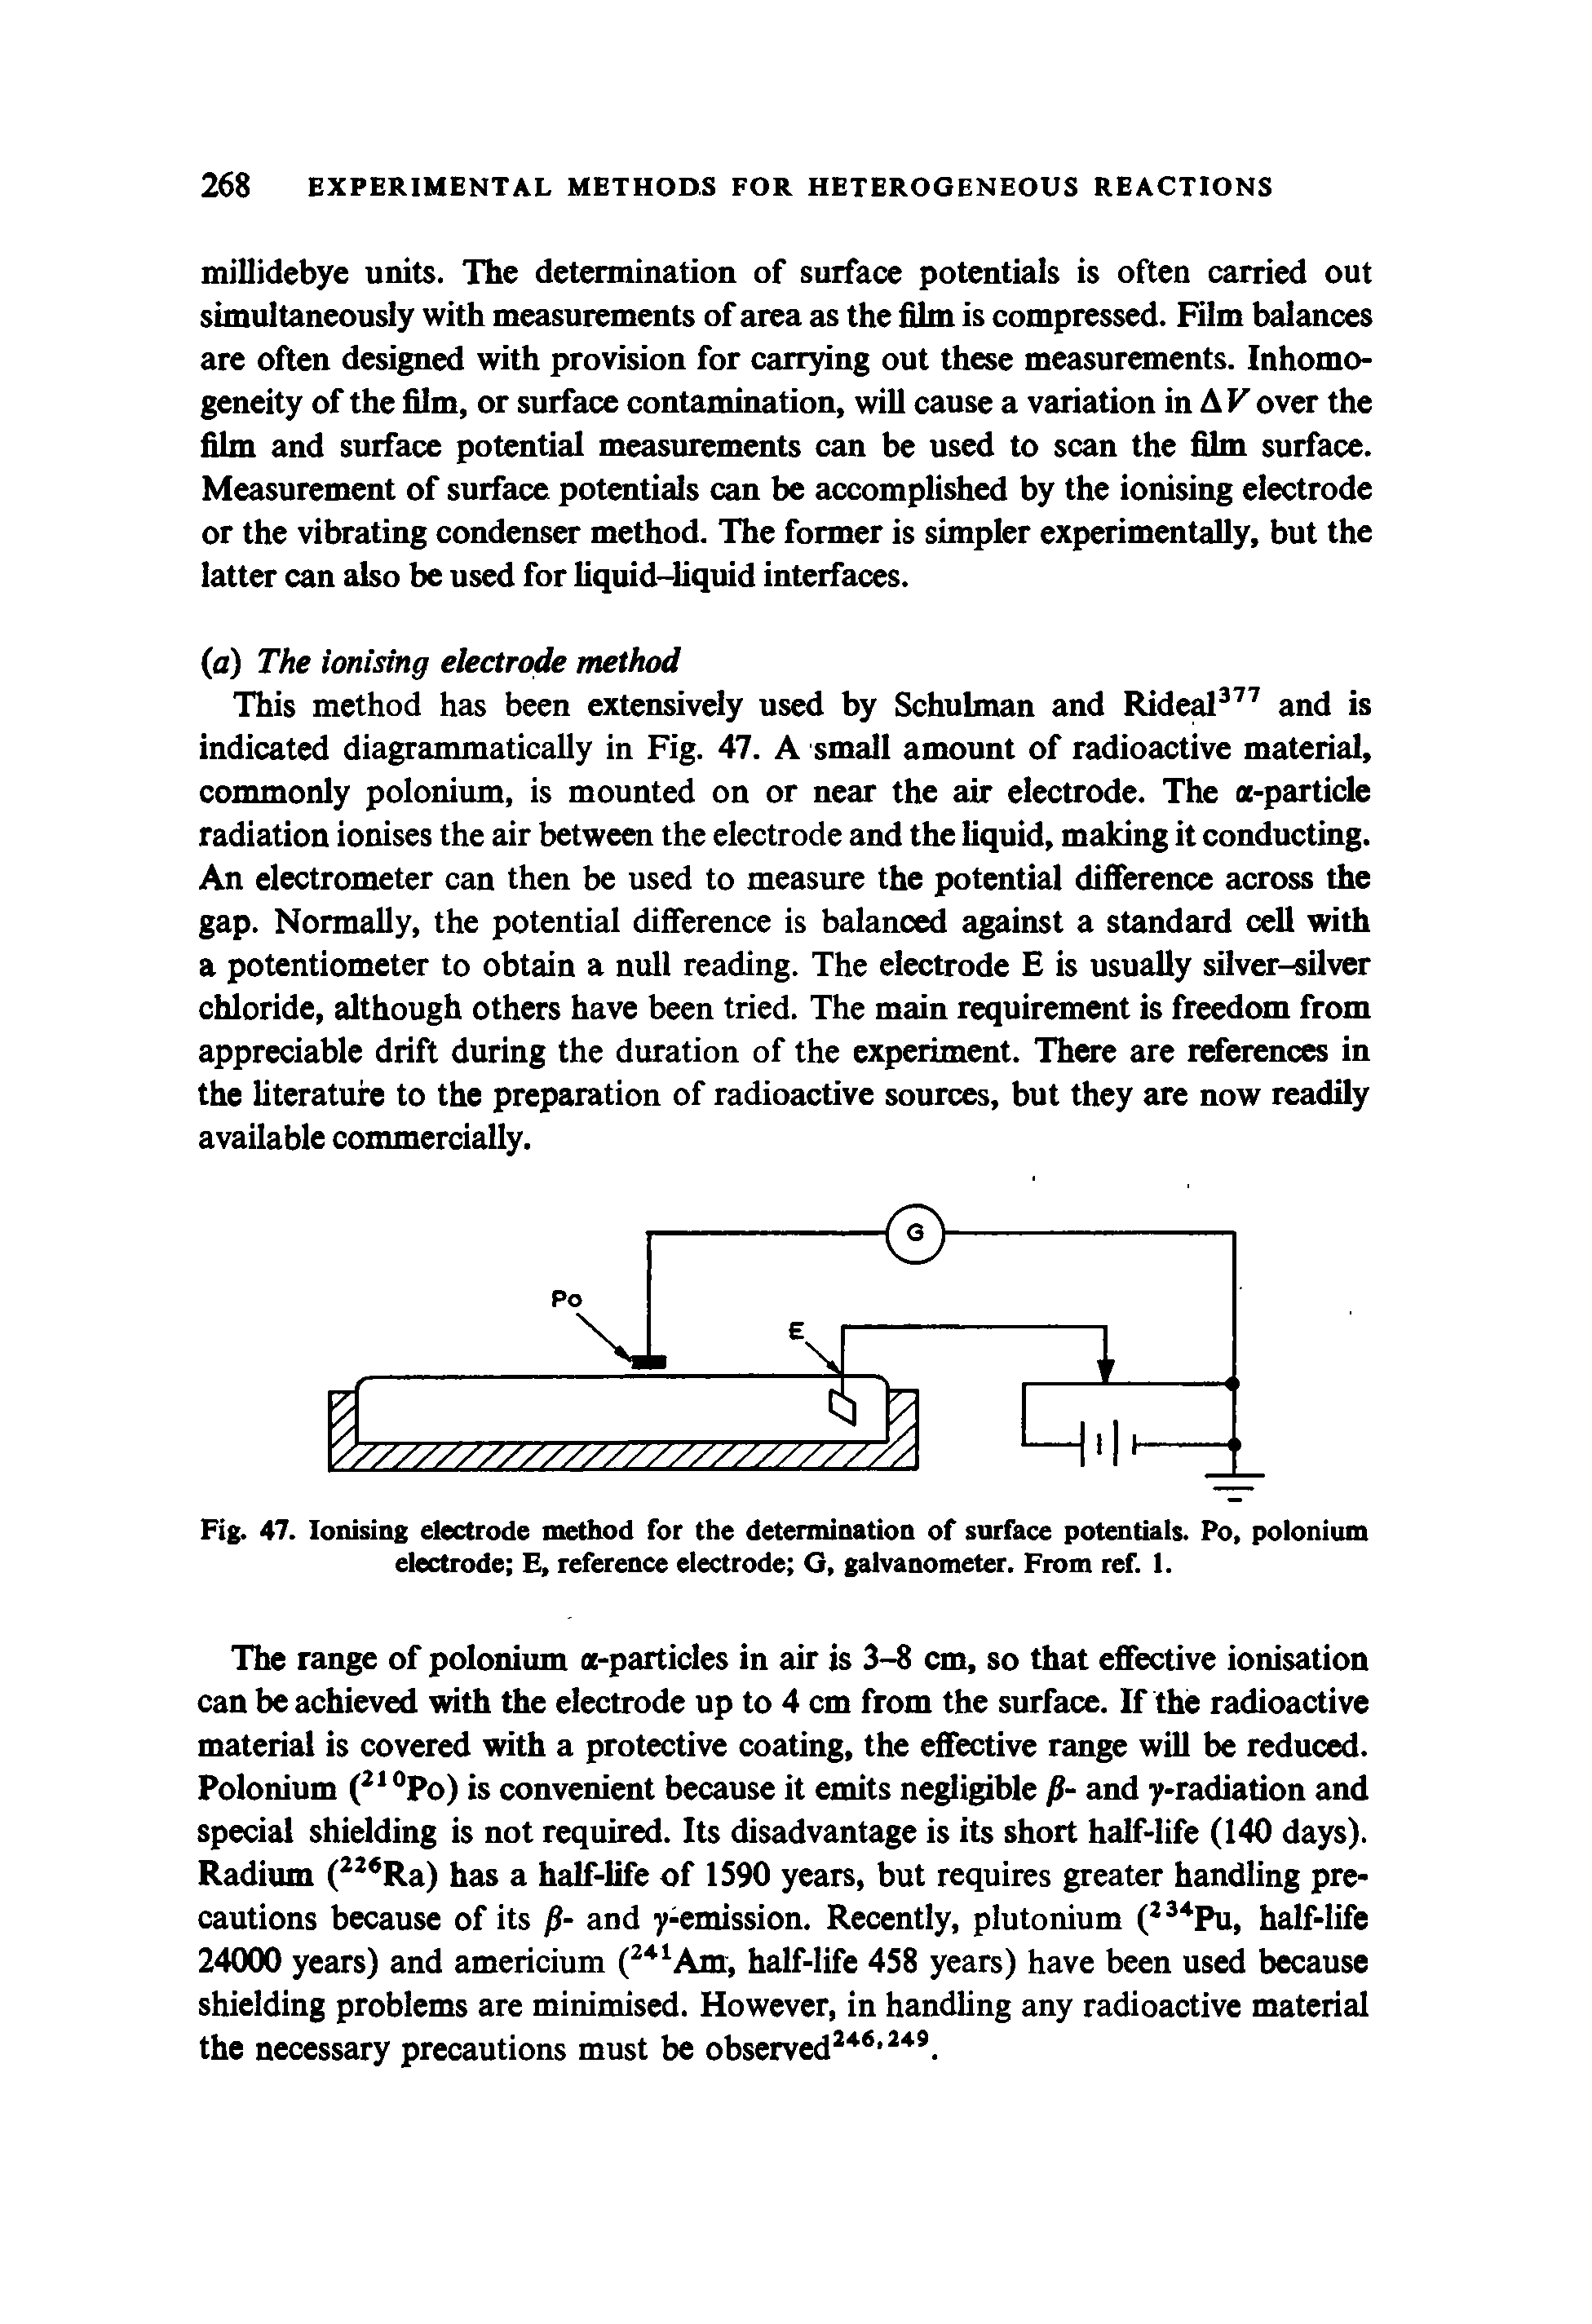 Fig. 47. Ionising electrode method for the determination of surface potentials. Po, polonium electrode E, reference electrode G, galvanometer. From ref. 1.